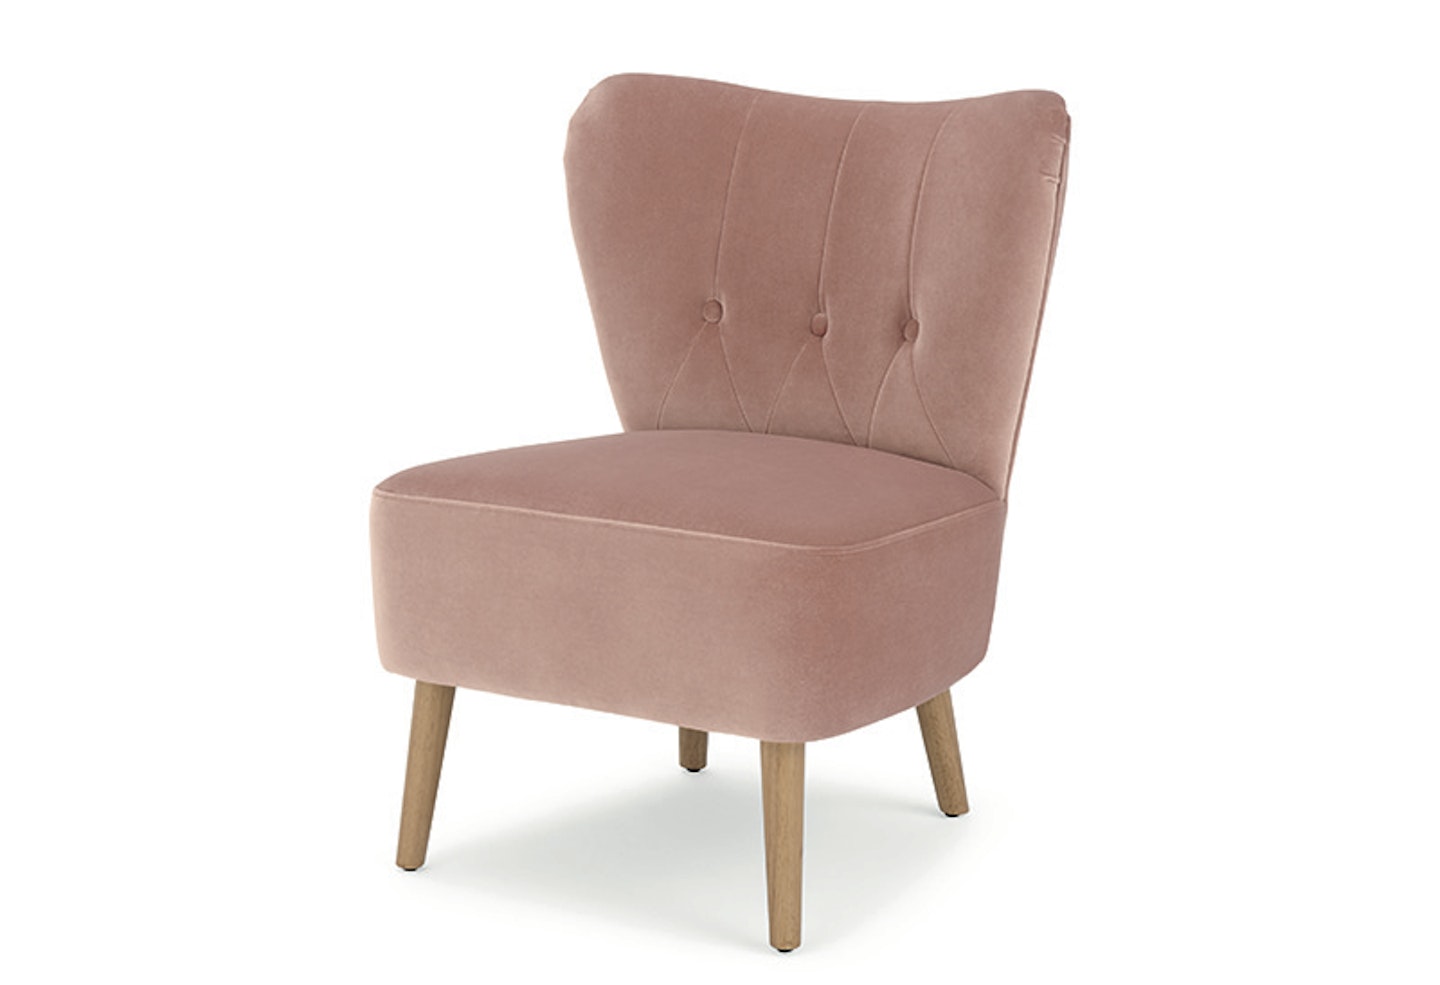 Charley Accent Chair, £179